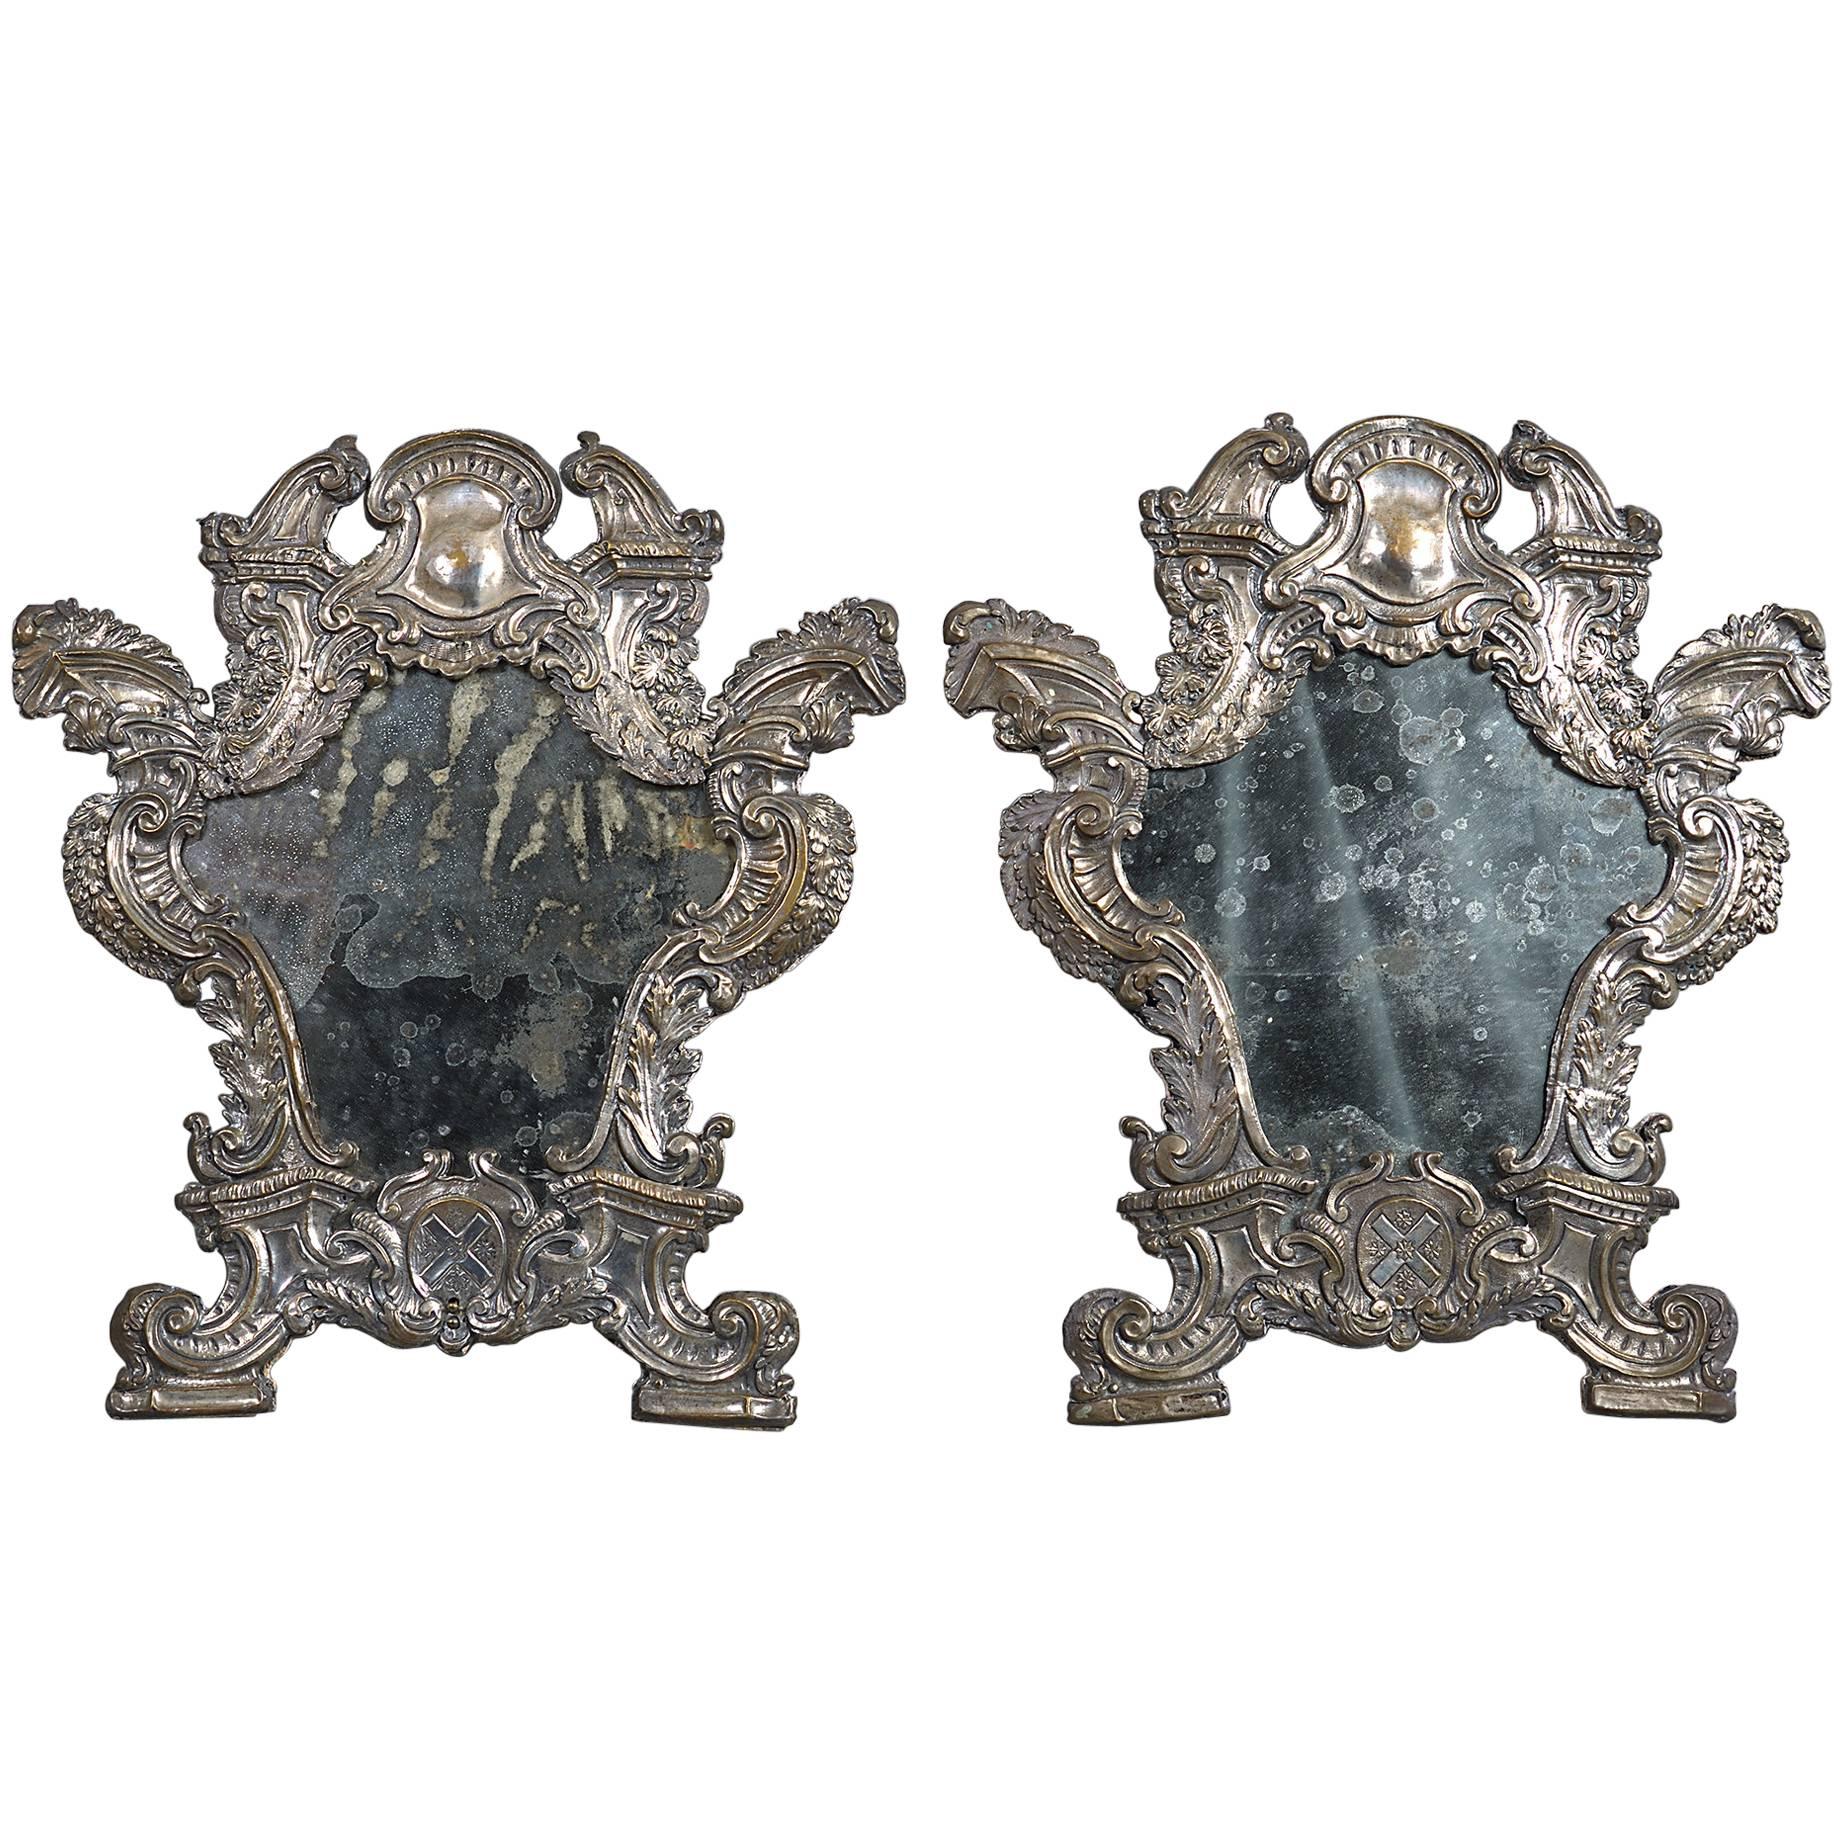 Rare 18th Century Pair of Silvered Wall Mirrors